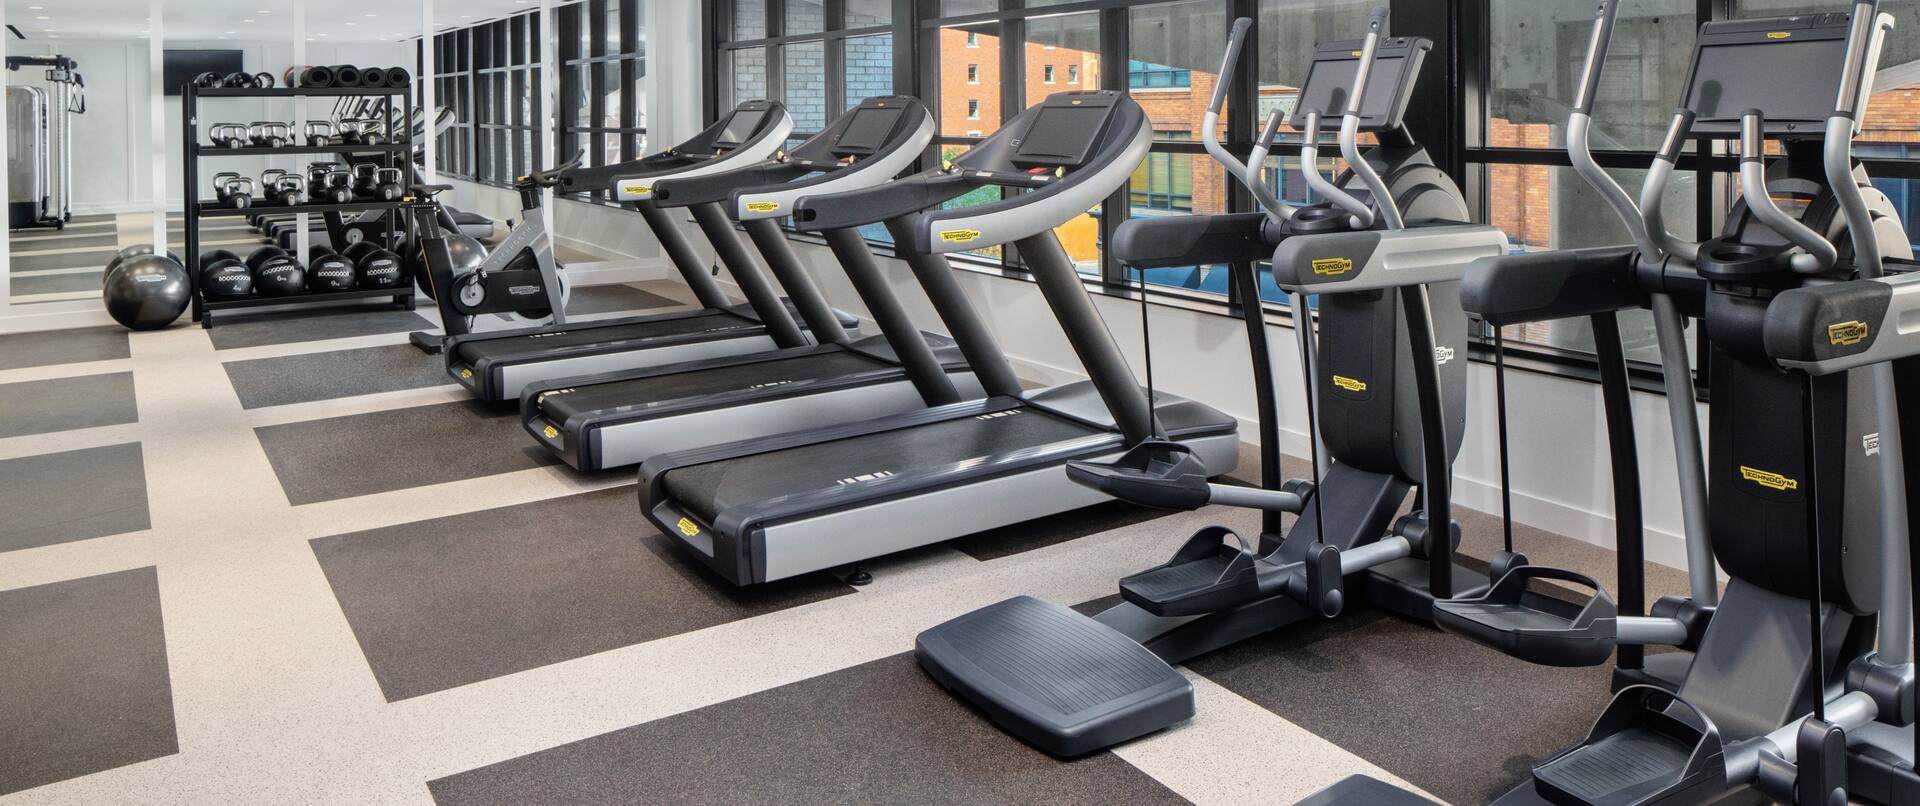 Treadmills Weights and Elliptical Machines in Fitness Center